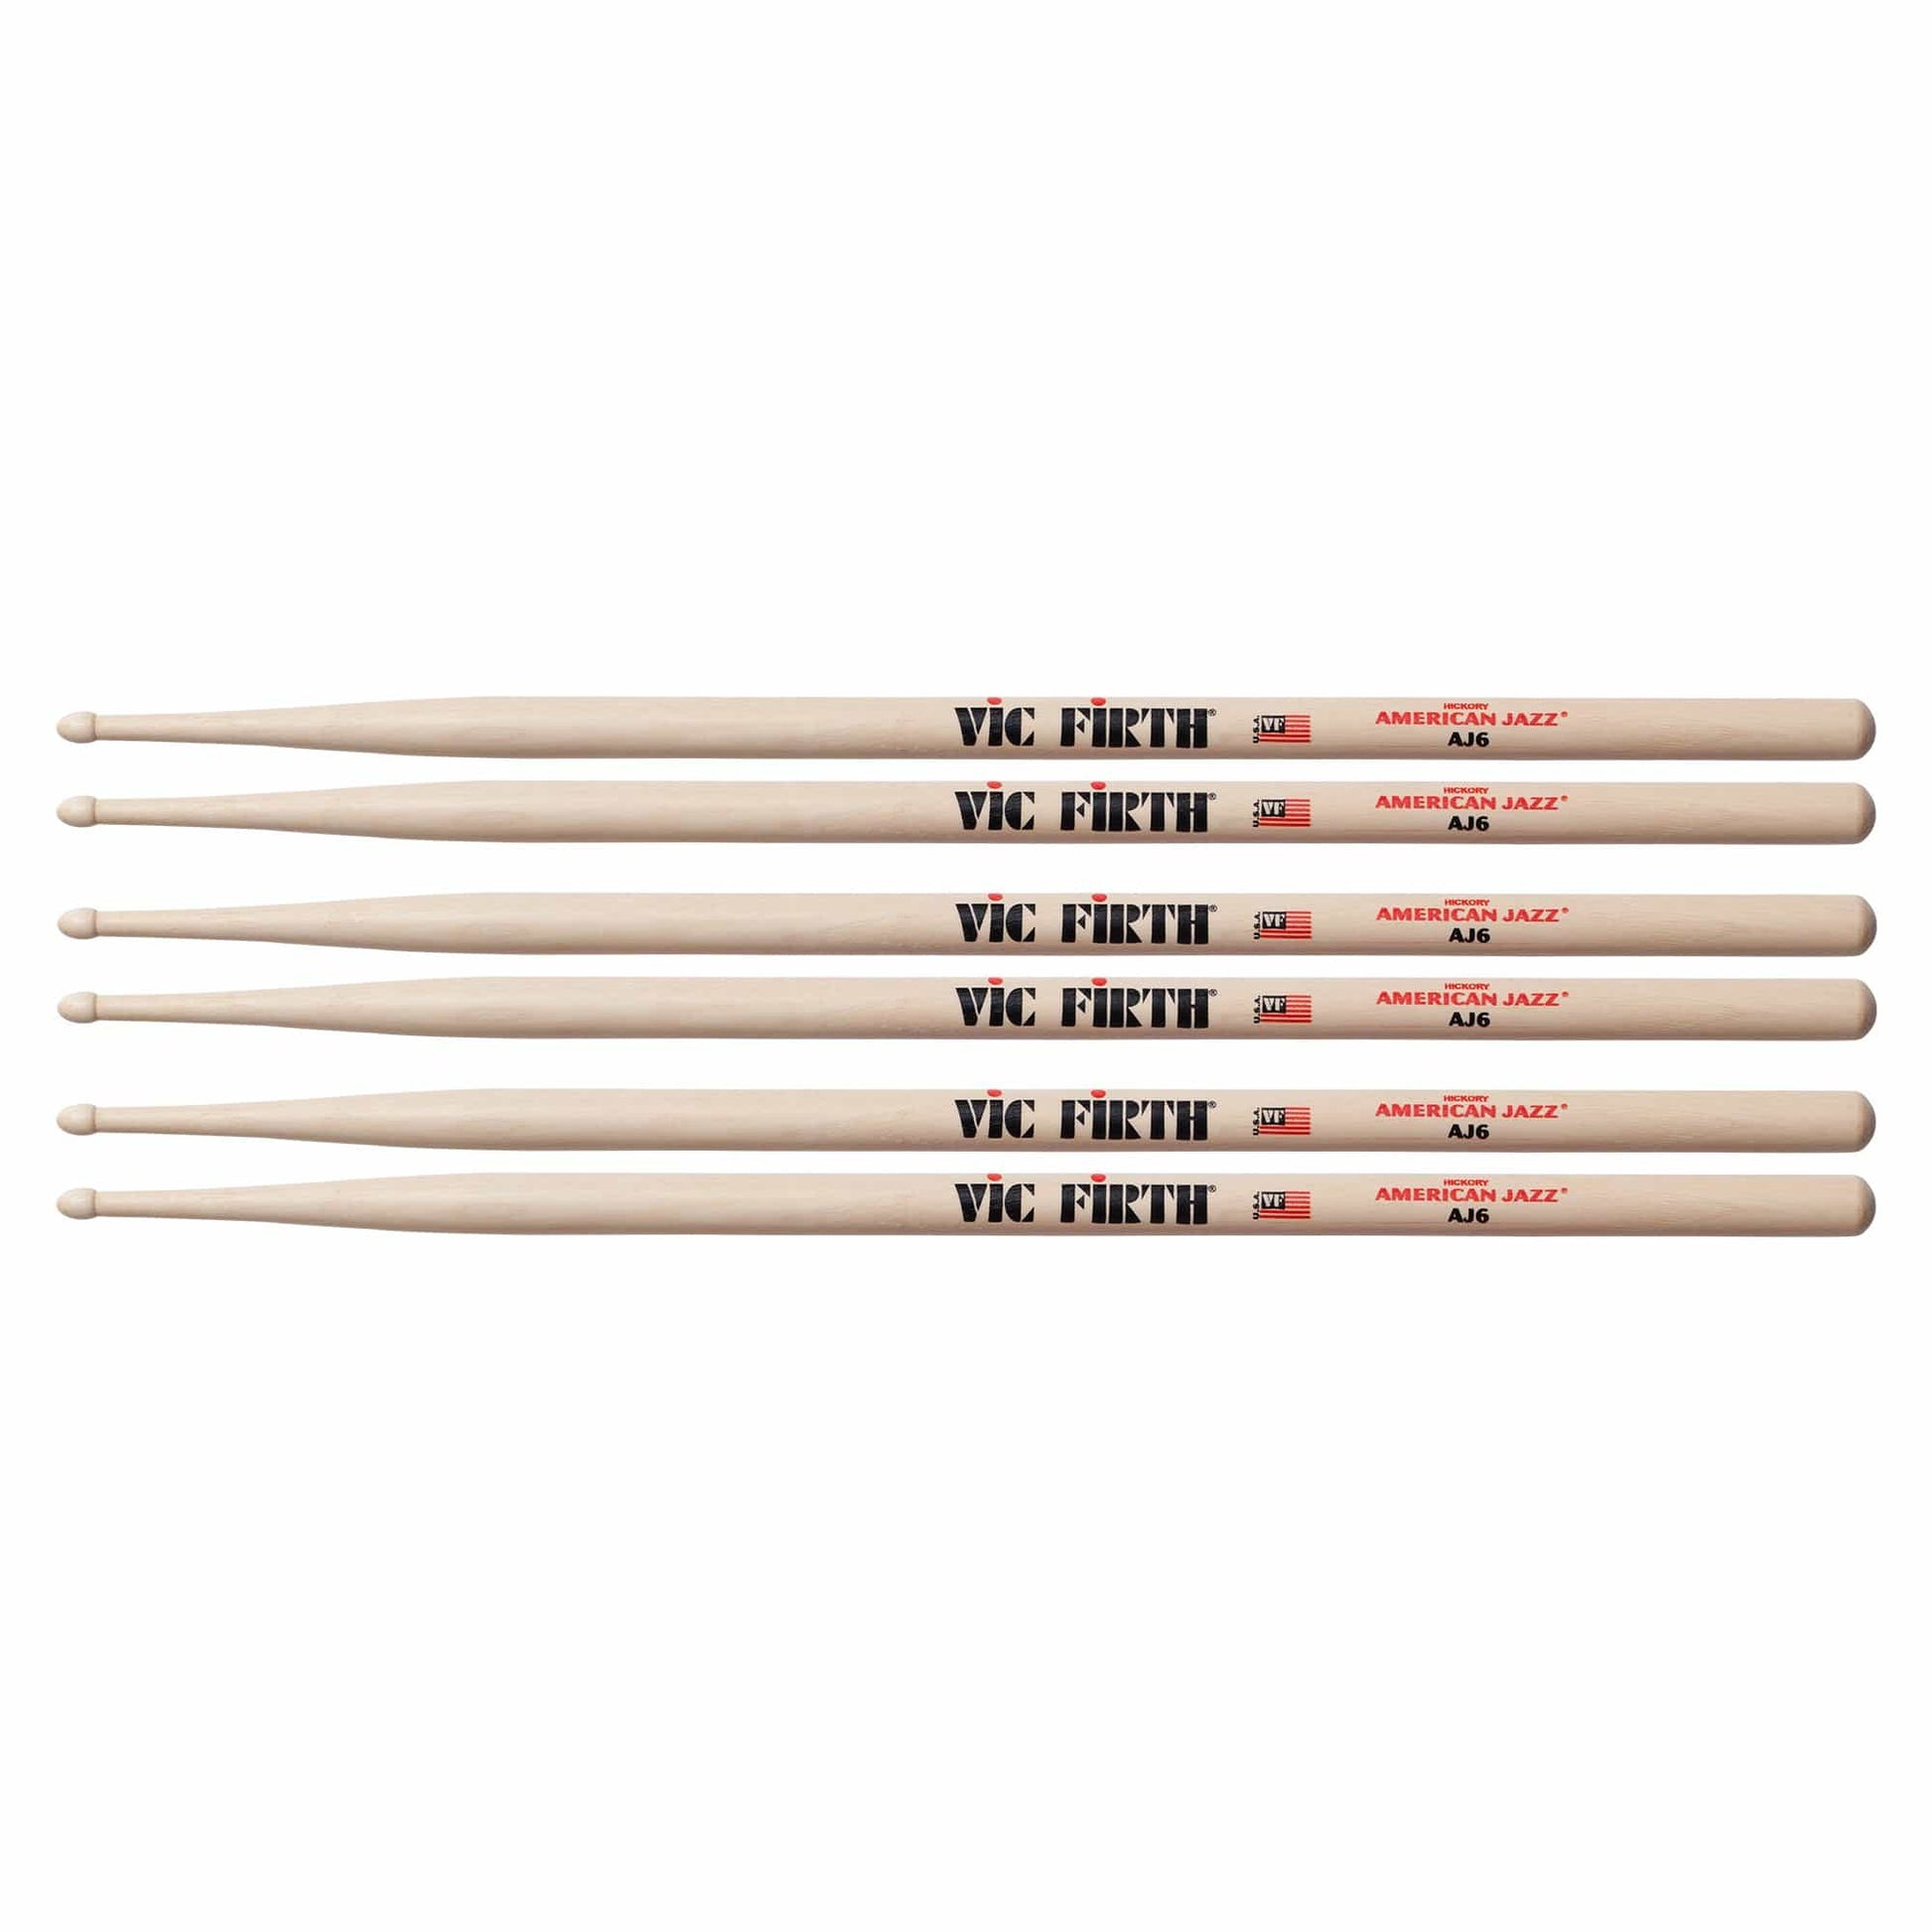 Vic Firth American Jazz AJ6 Wood Tip Drum Sticks (3 Pair Bundle) Drums and Percussion / Parts and Accessories / Drum Sticks and Mallets